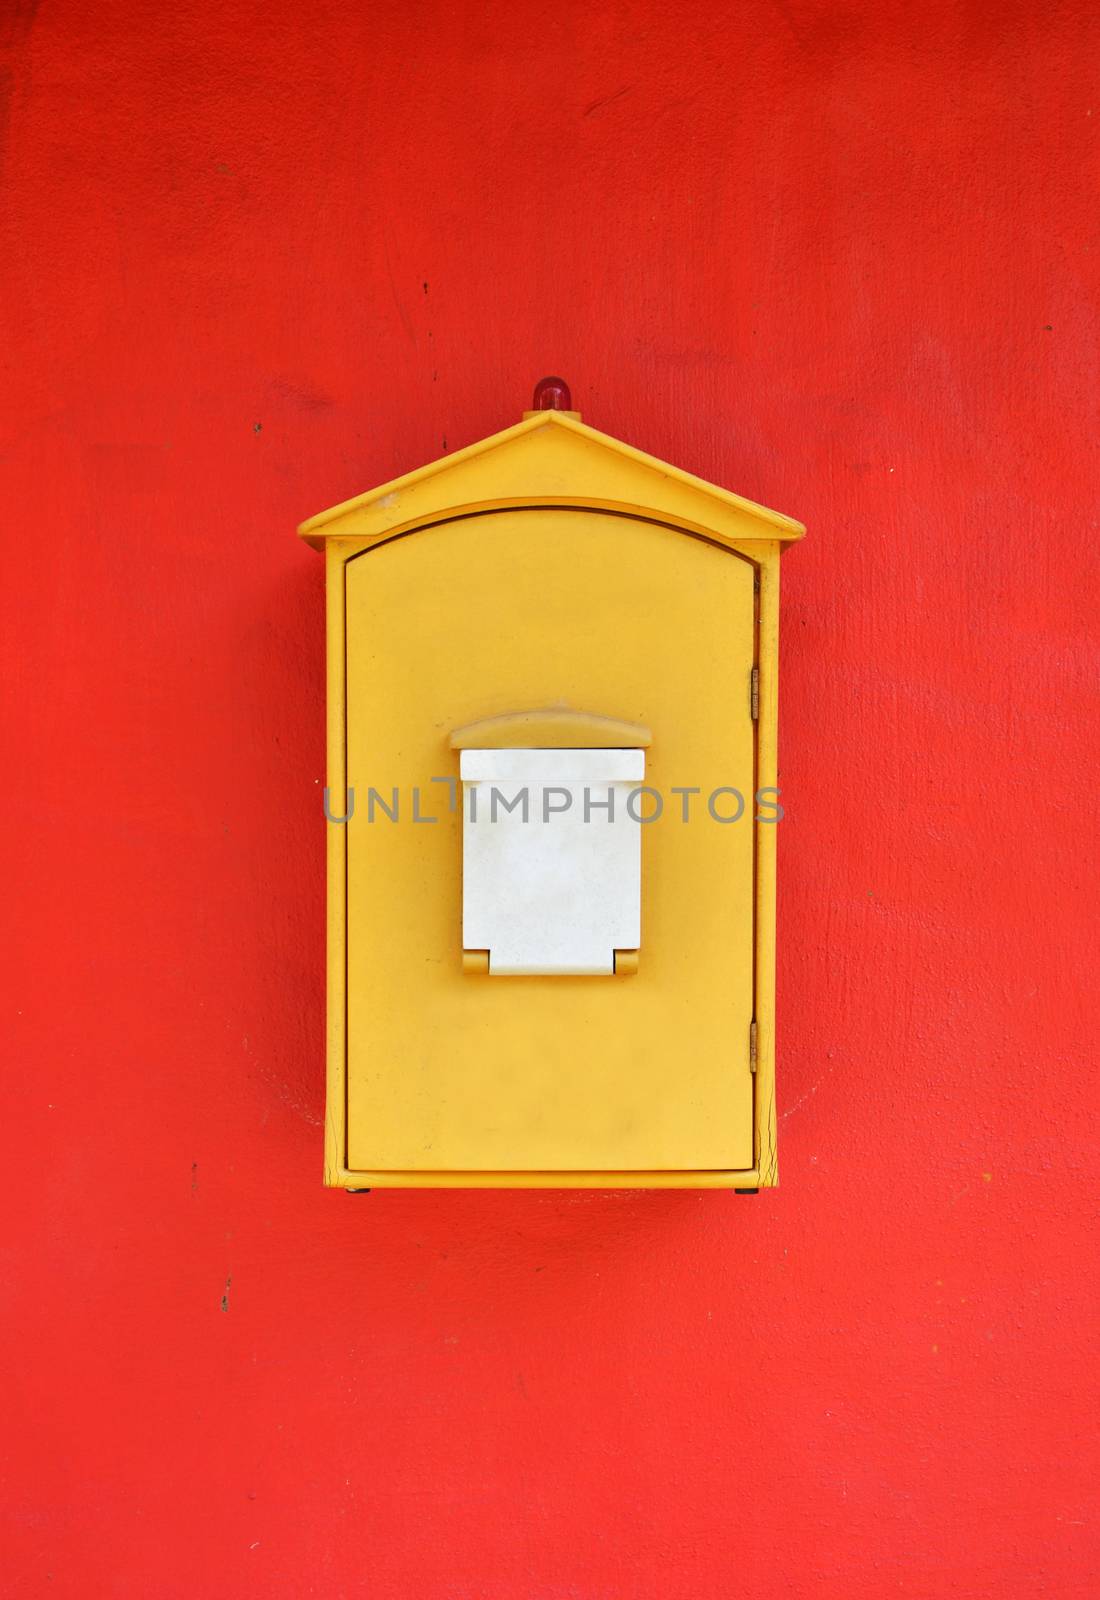 Decorated Mailbox on Red Background by siraanamwong